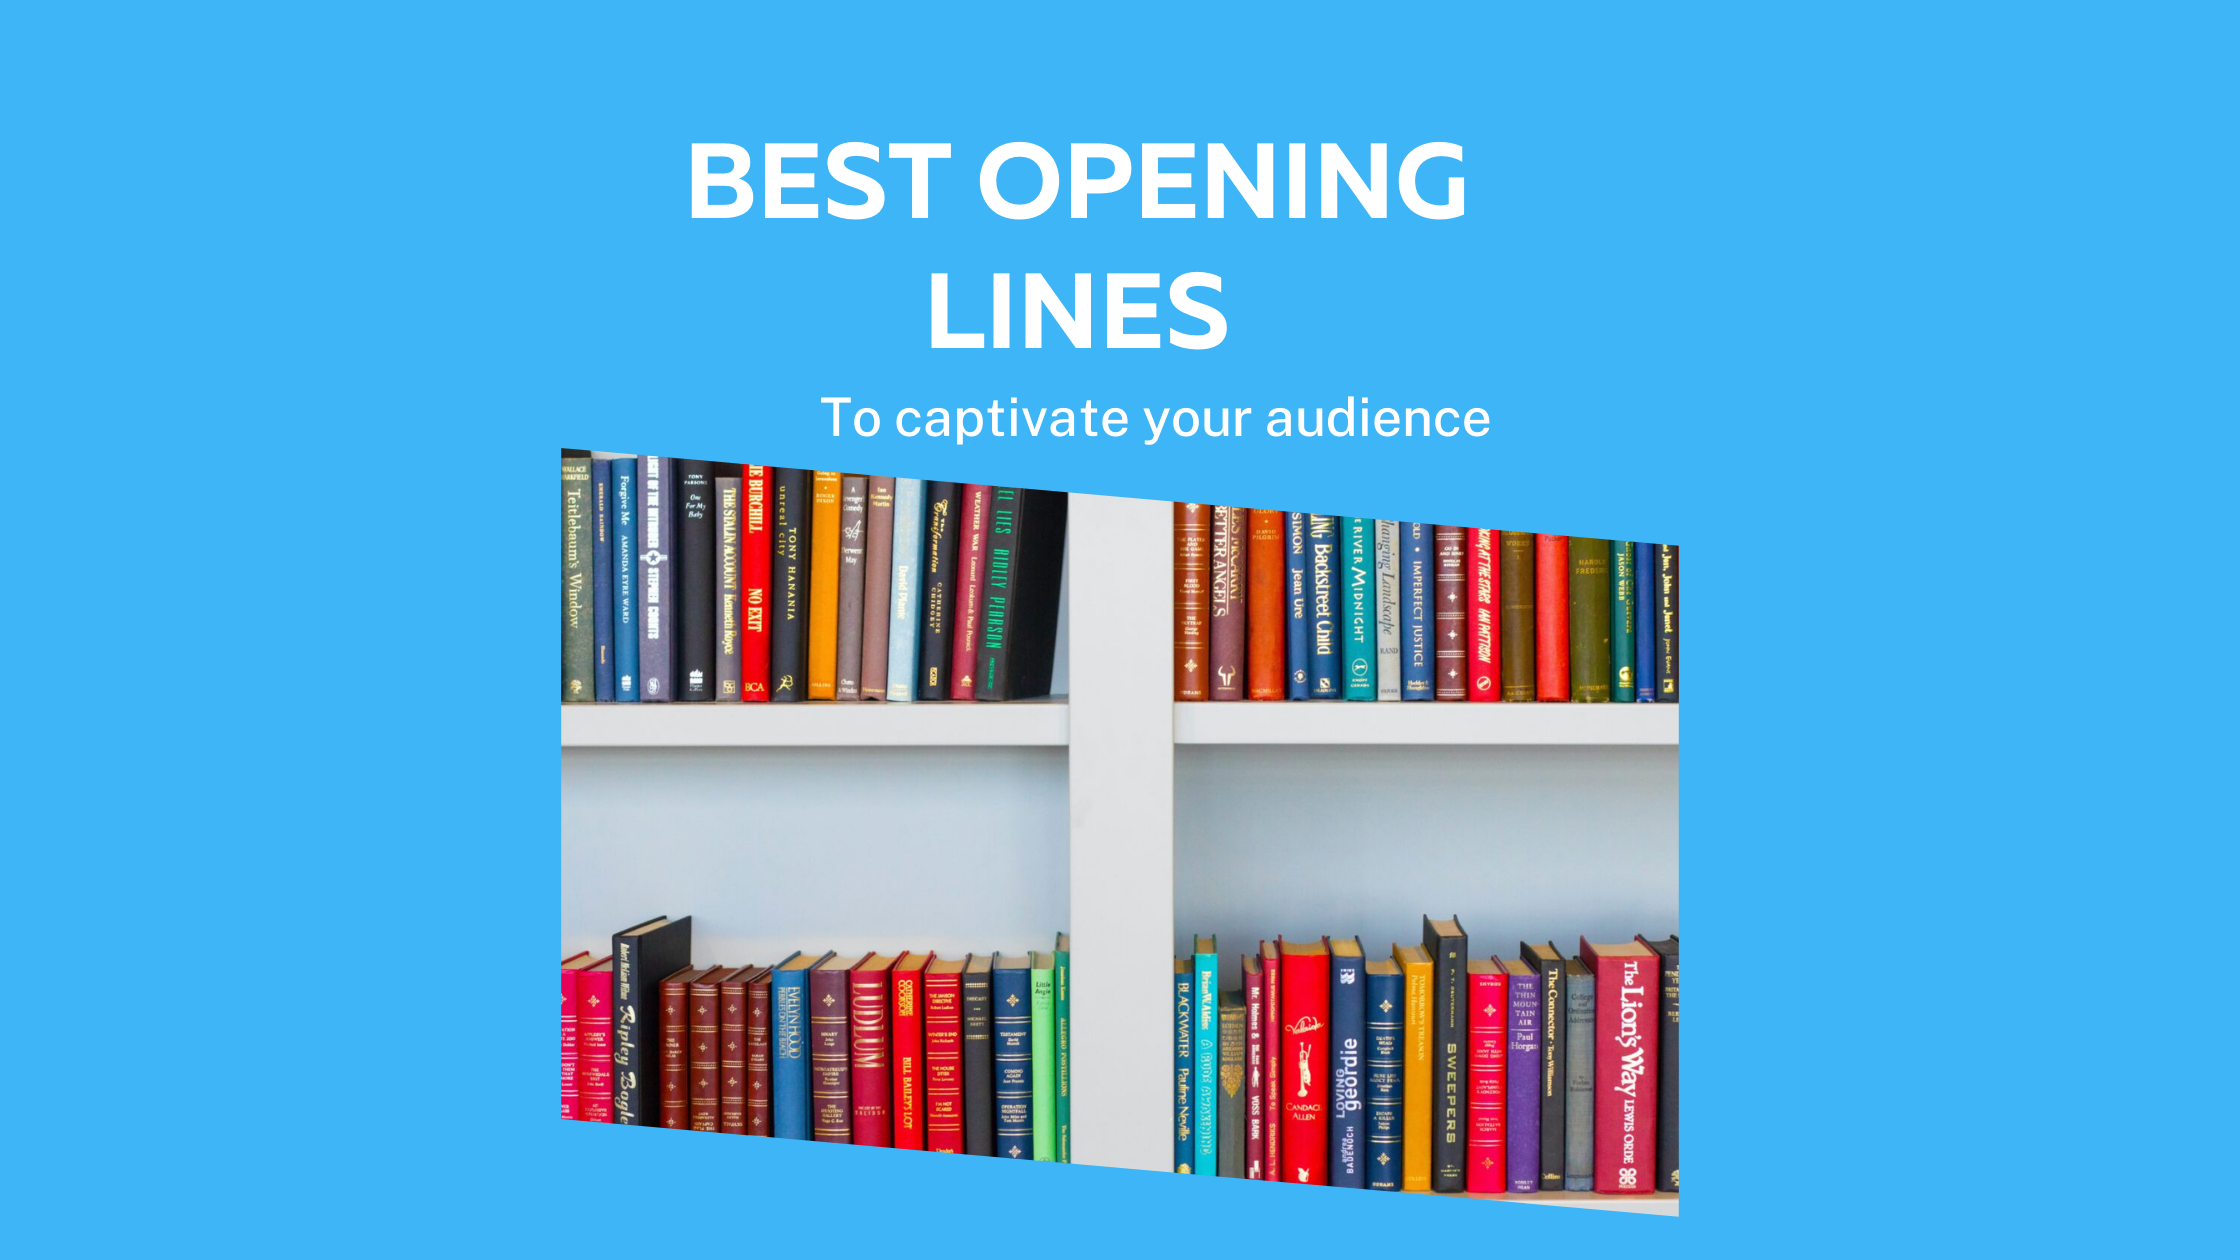 300+ Best Opening Lines in Movies, Novels, Books & More